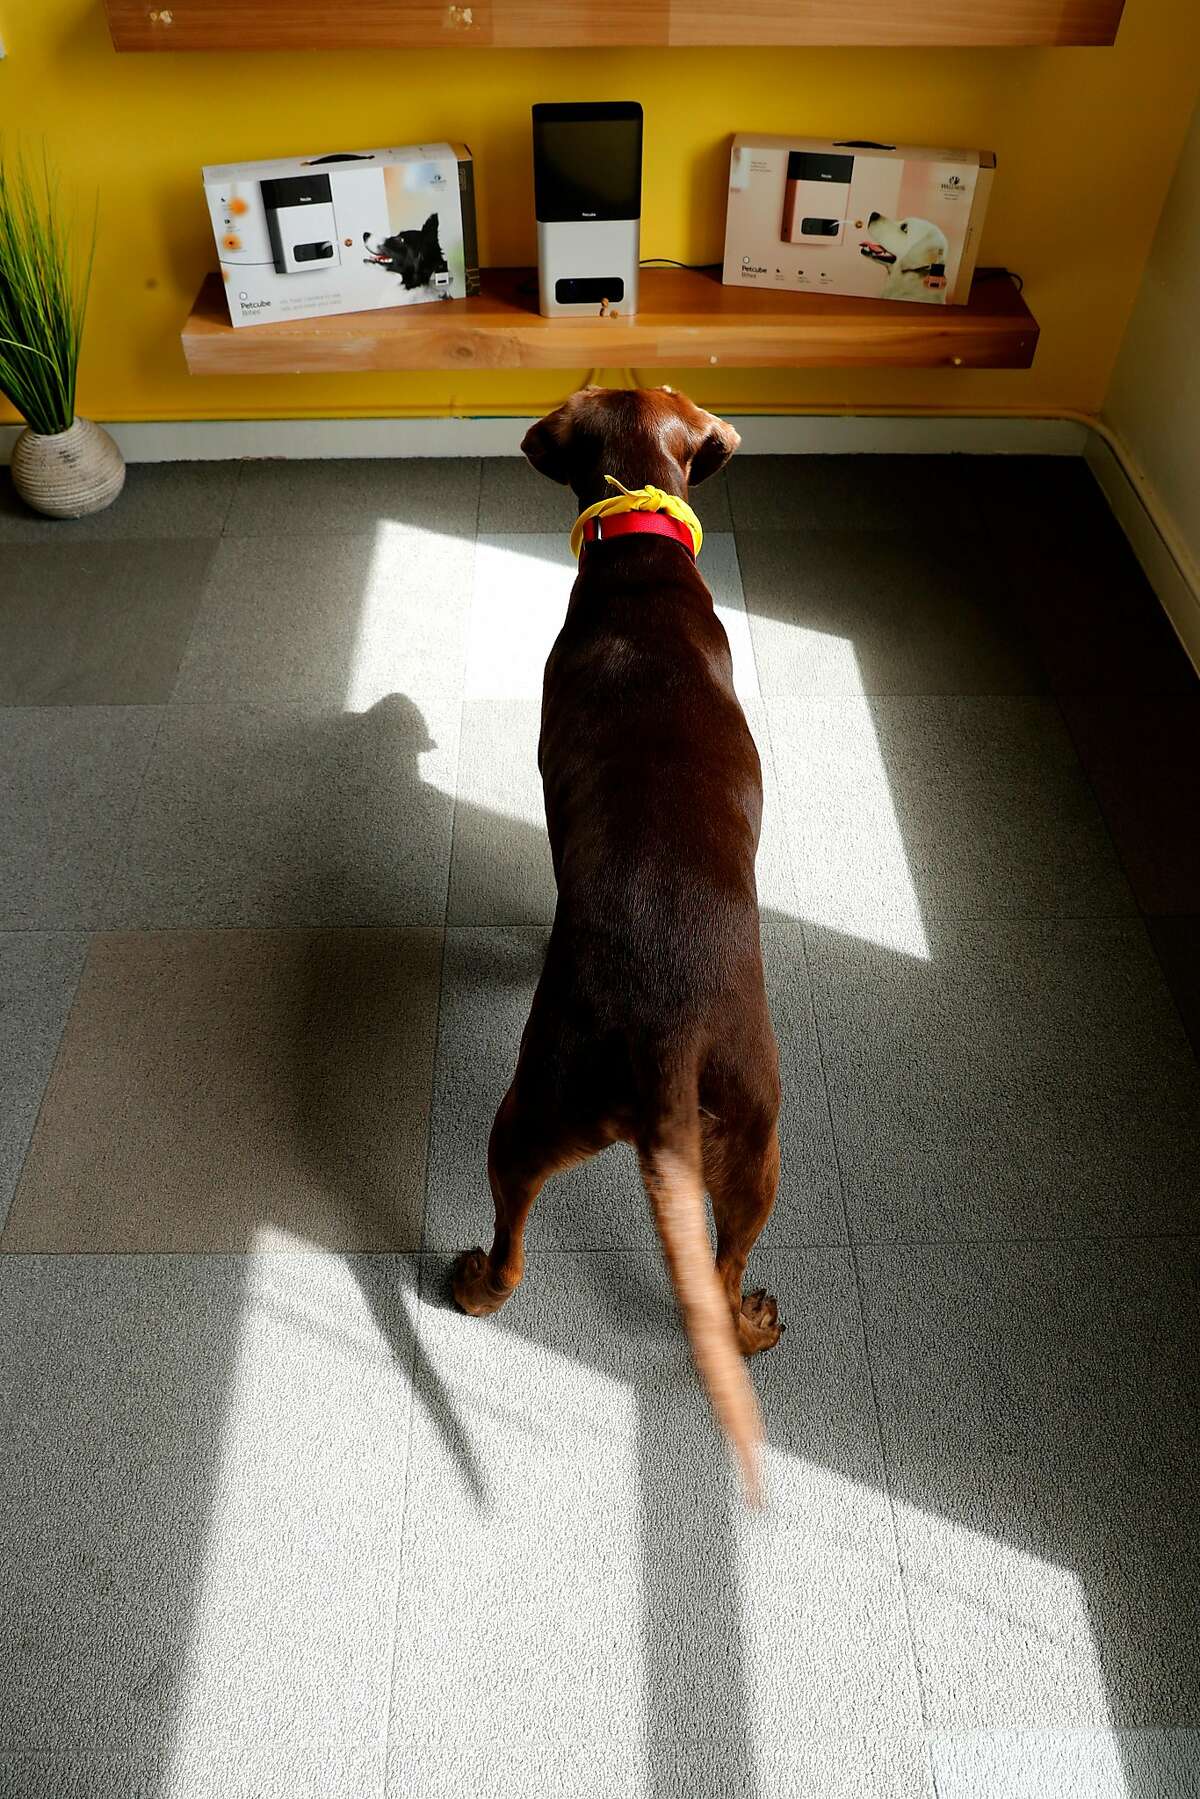 "Lola" the dog, seen waiting for a treat to be delivered by the Petcube Bites device during a demonstration at the offices of Petcube in San Francisco, Ca., as seen on Wed. July 26, 2017. The company has created several devices one that monitors pets through a smart phone as well as another machine that flings pet treats also using a smart phone app.